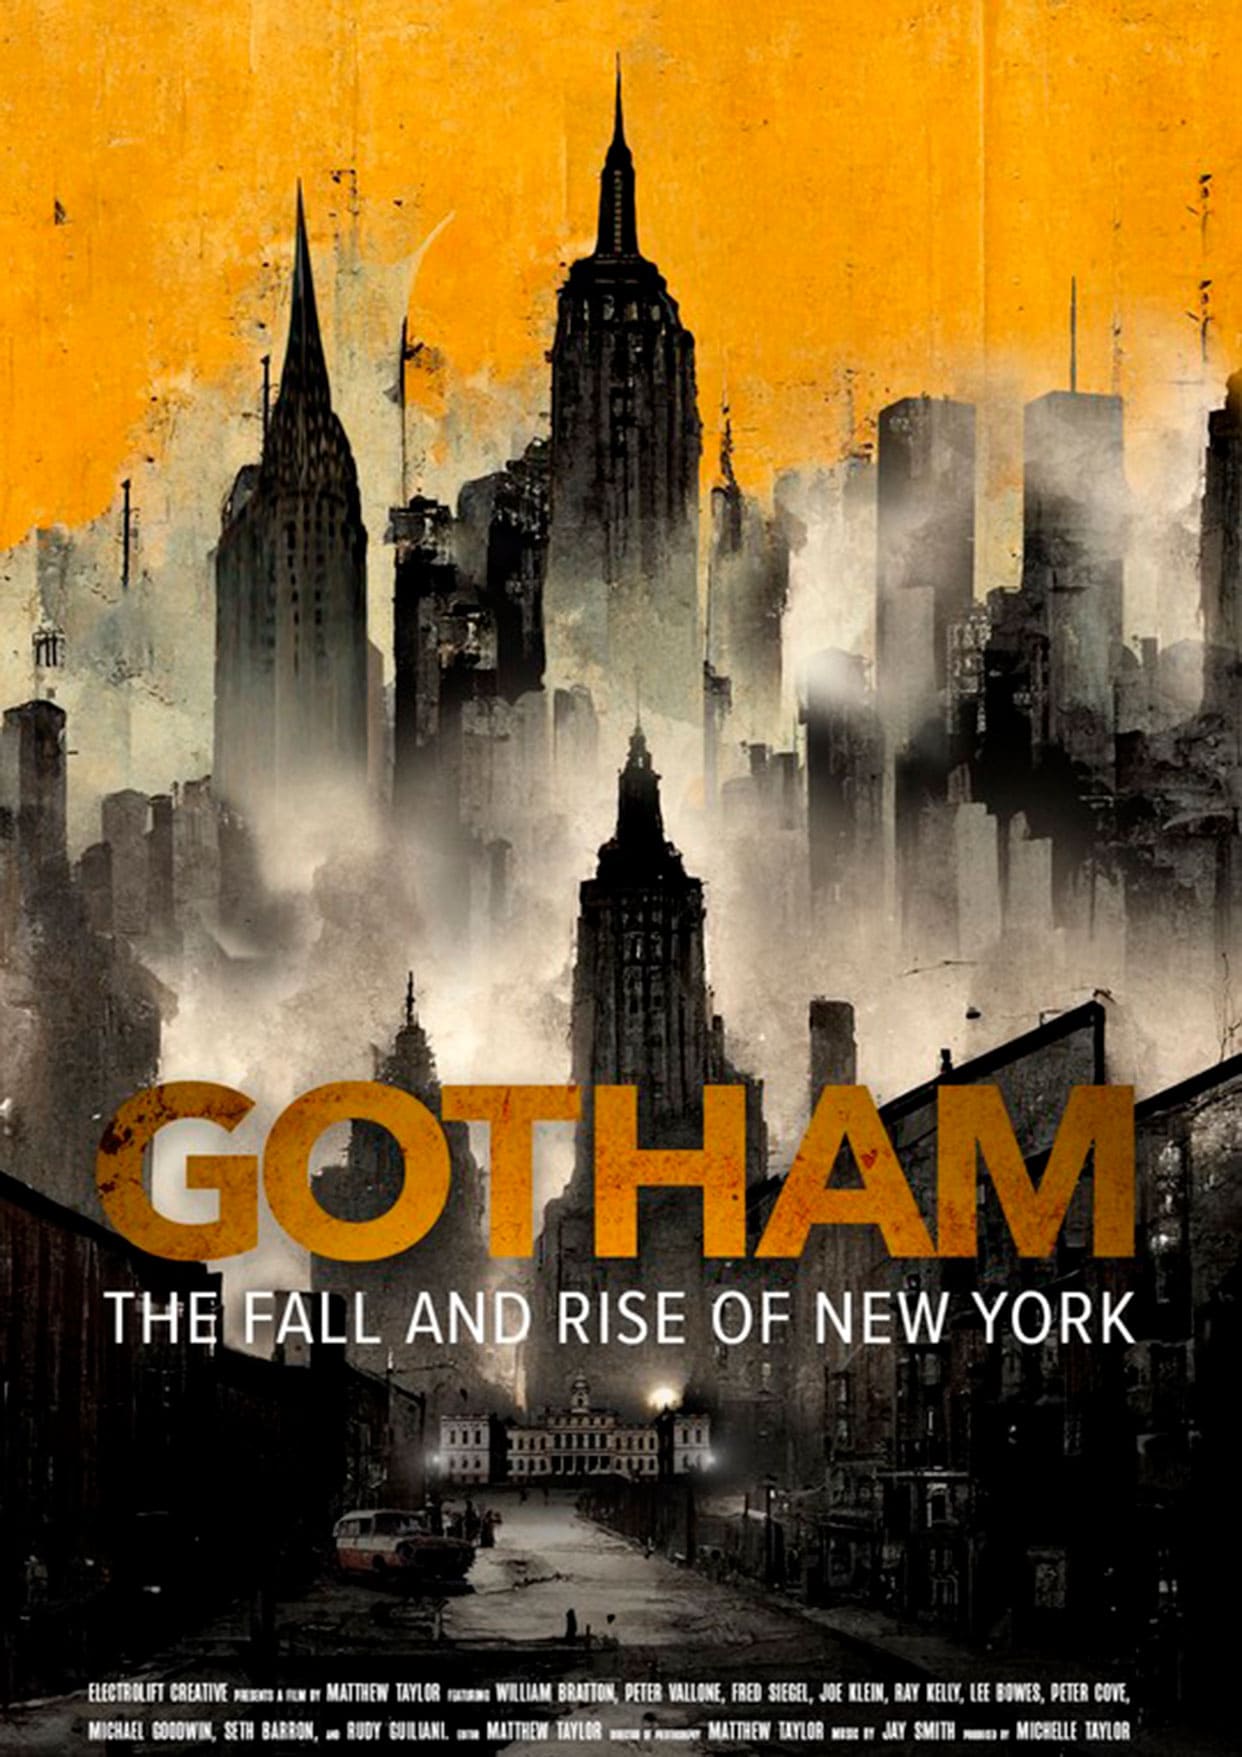 Gotham: The Fall and Rise of New York<br />
